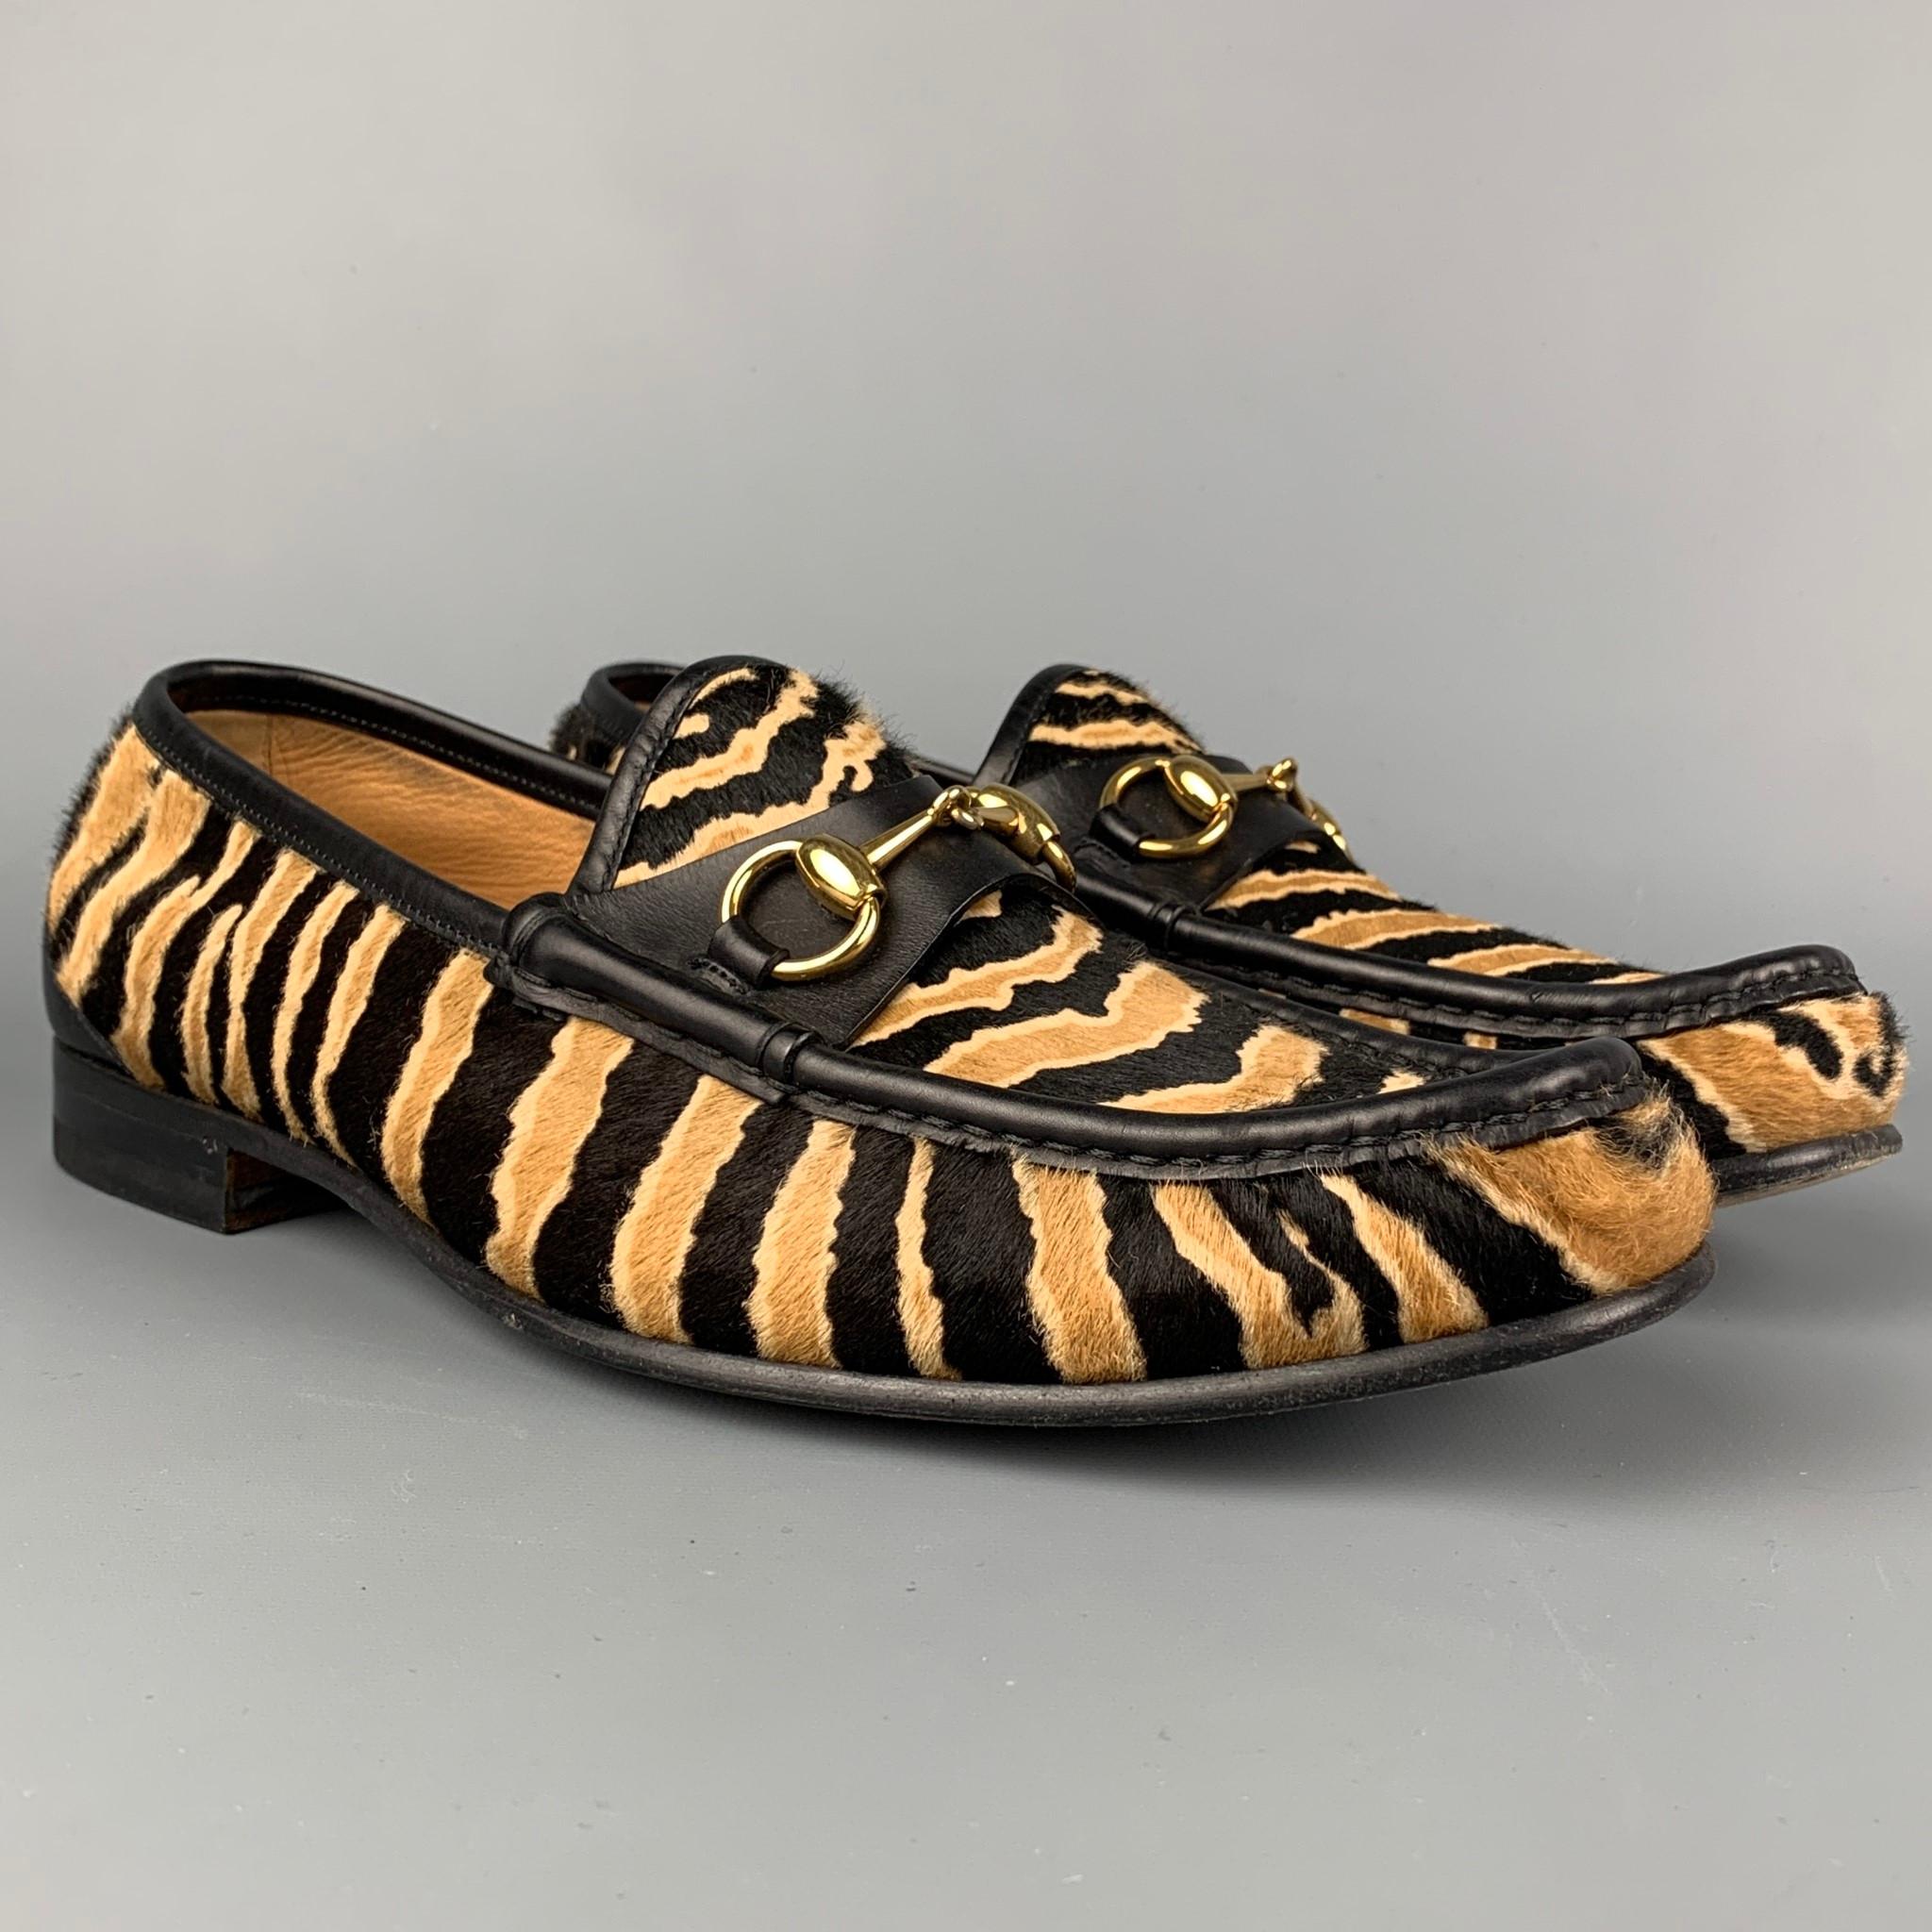 GUCCI loafers comes in a black & beige calf hair featuring a gold tone horsebit design, leather trim, and a slip on style. Made in Italy. 

Very Good Pre-Owned Condition.
Marked: 297964 8.5
Original Retail Price: $1,080.00

Outsole: 11.5 in. x 4 in. 